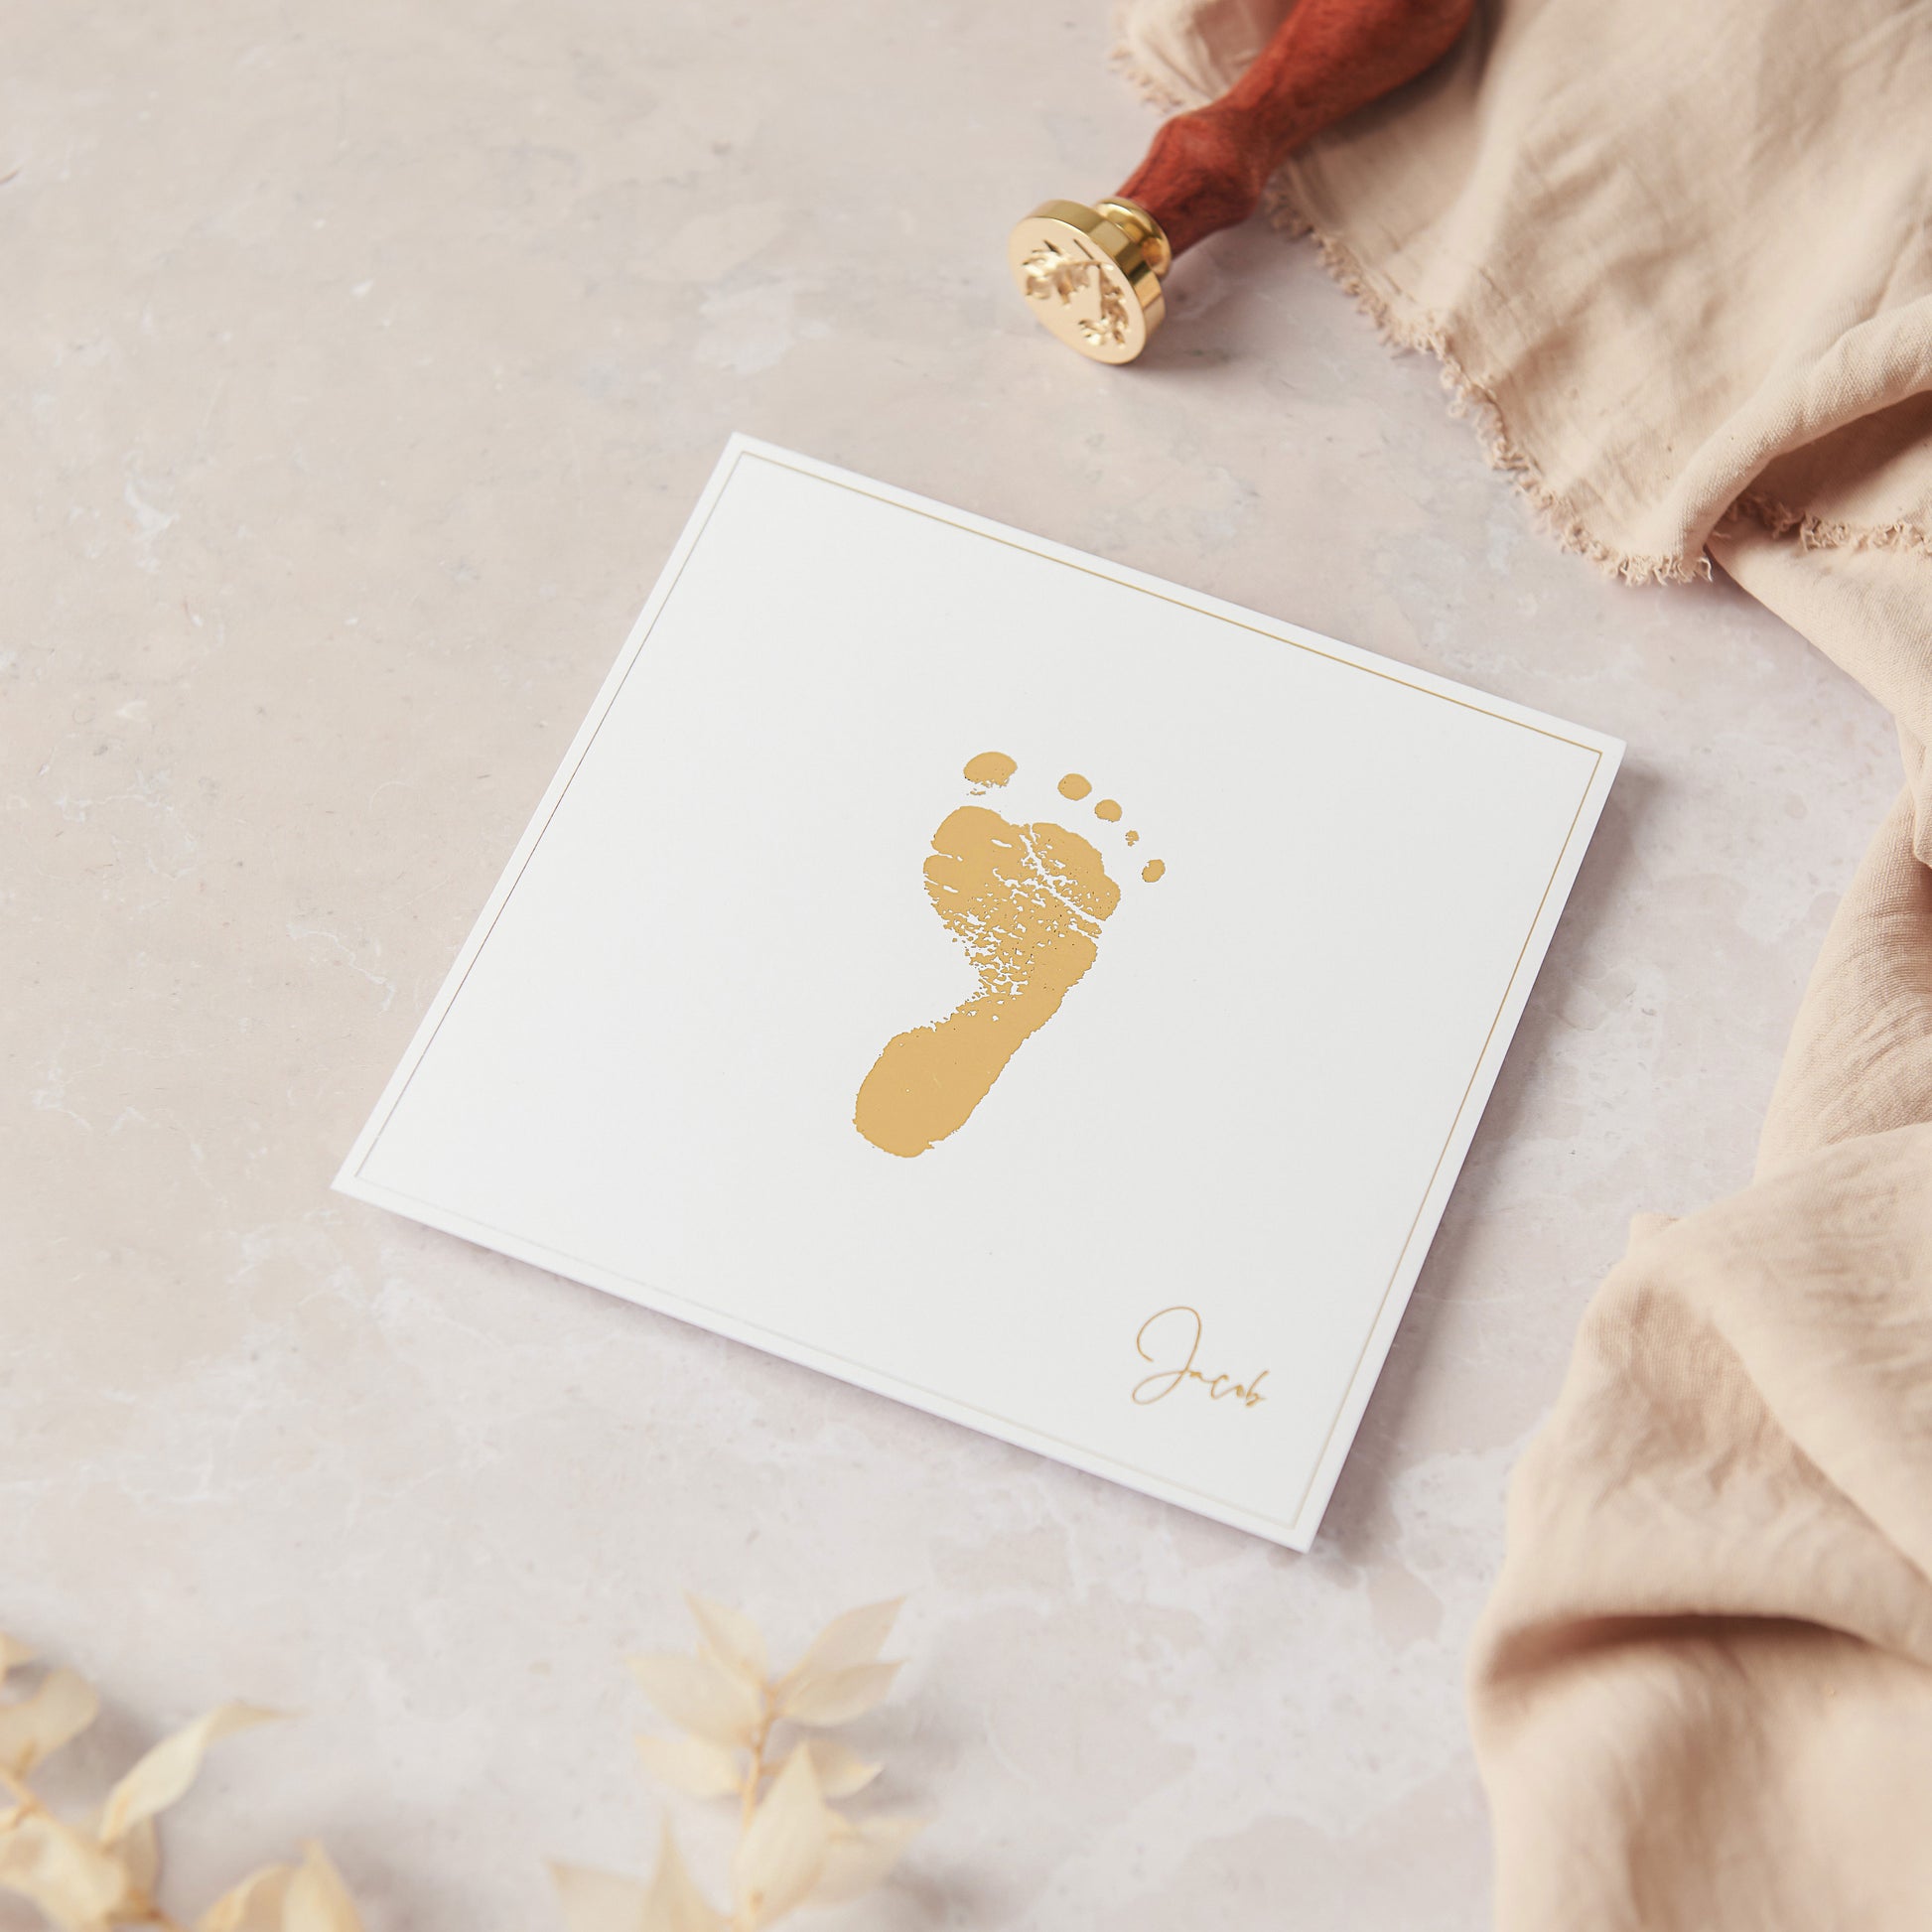 A flat lay photograph showing our 5 inch square personalised foot print keepsake. The foot print keepsake is shown in Gold and white, where the baby's footprint is recreated to scale in metallic gold foil which is fused on to smooth white cardstock centrally. The foot print keepsake is further personalised with the baby's name "jacob" in a gold foiled script font to the bottom right corner of the cardstock. The keepsake is unframed and is shown resting on a light pink marble style back drop.